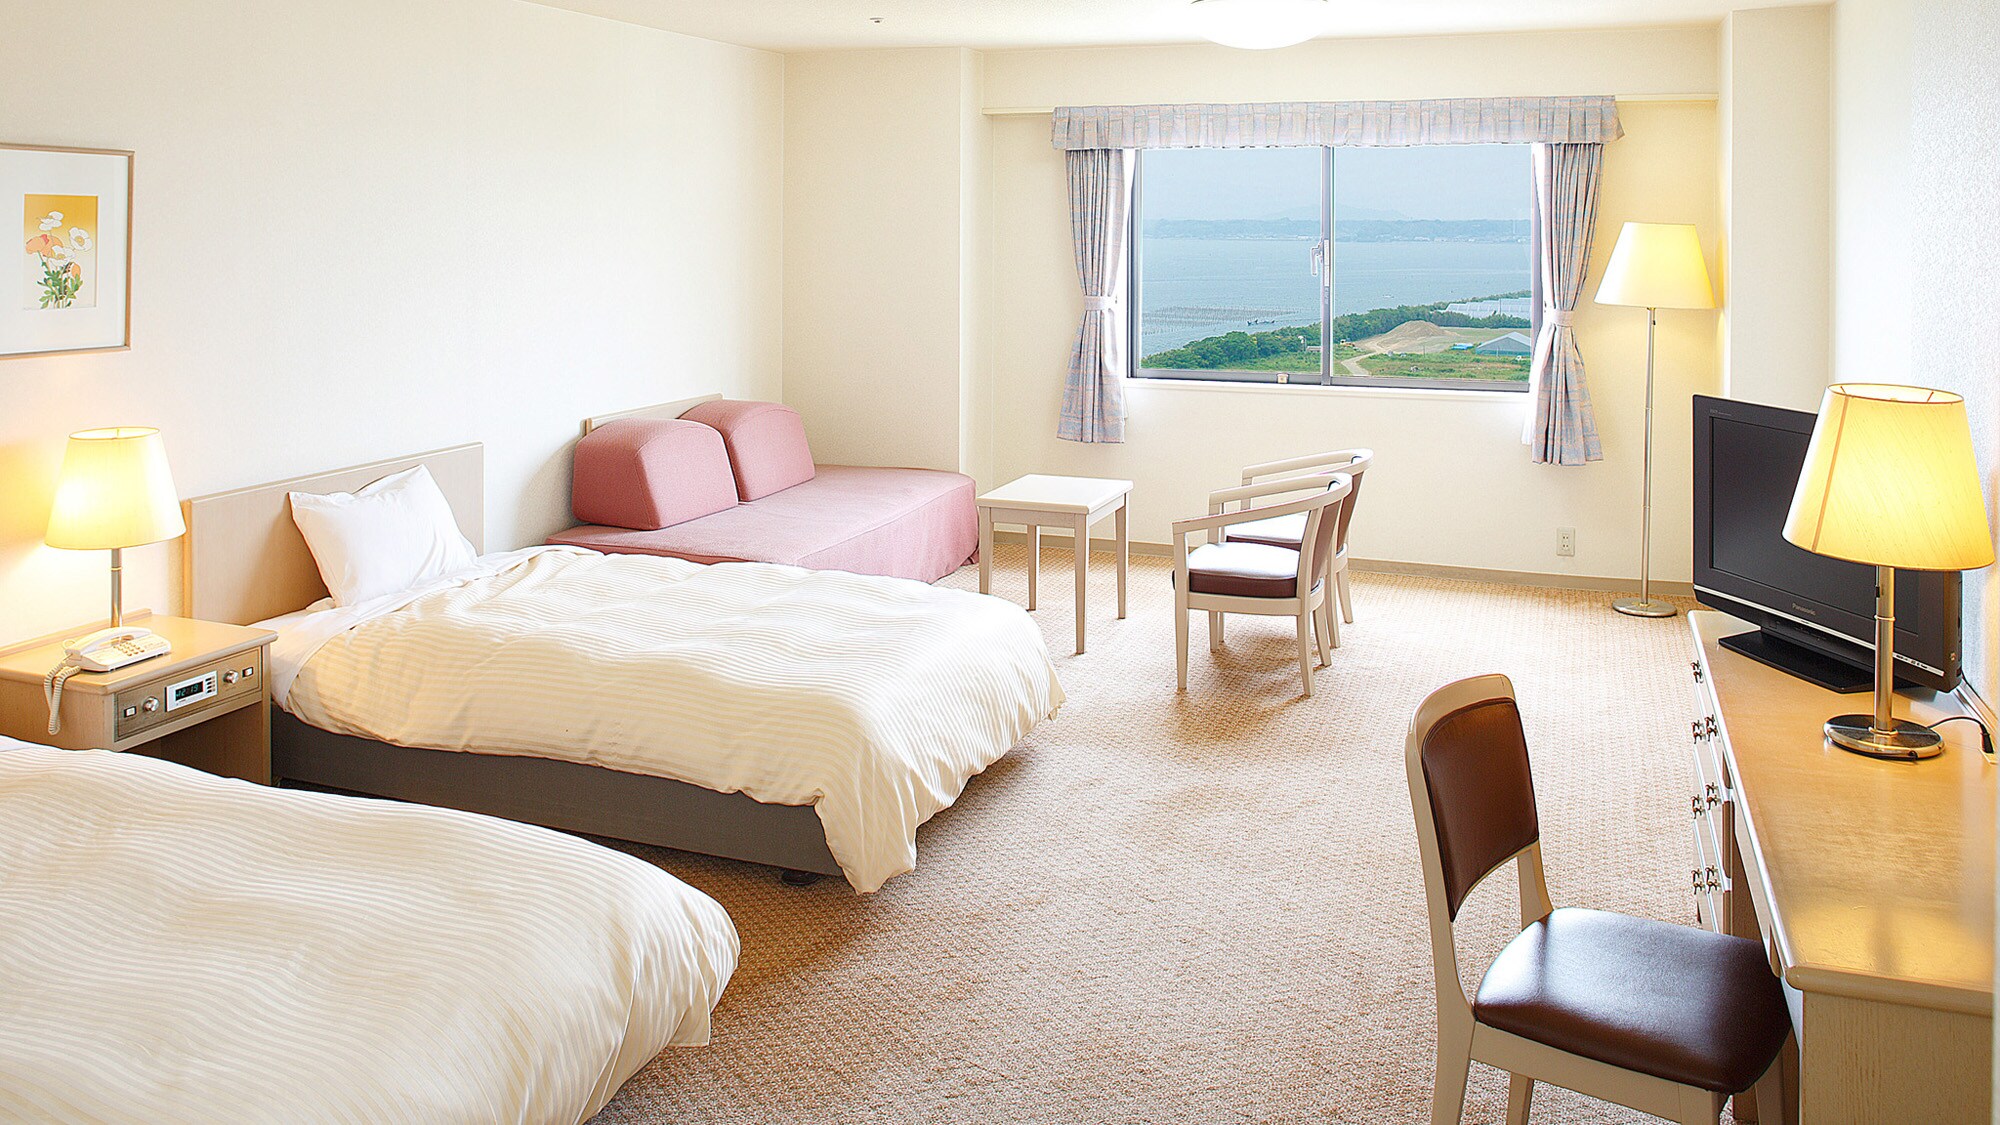 [Western-style twin room] Spacious 36㎡. Up to 4 beds are possible with the addition of an auxiliary bed